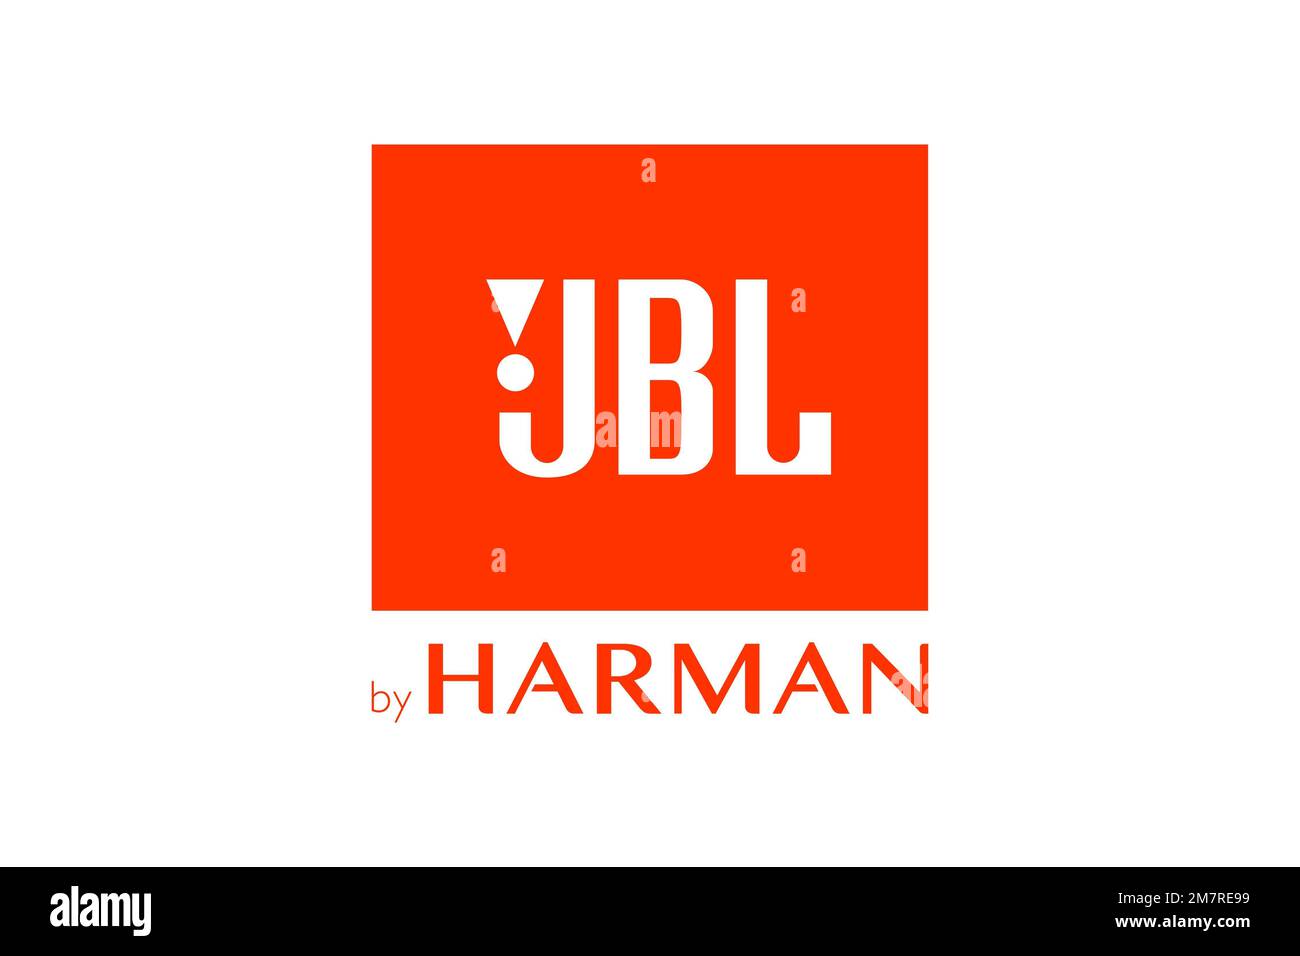 Jbl symbol Cut Out Stock Images & Pictures - Alamy